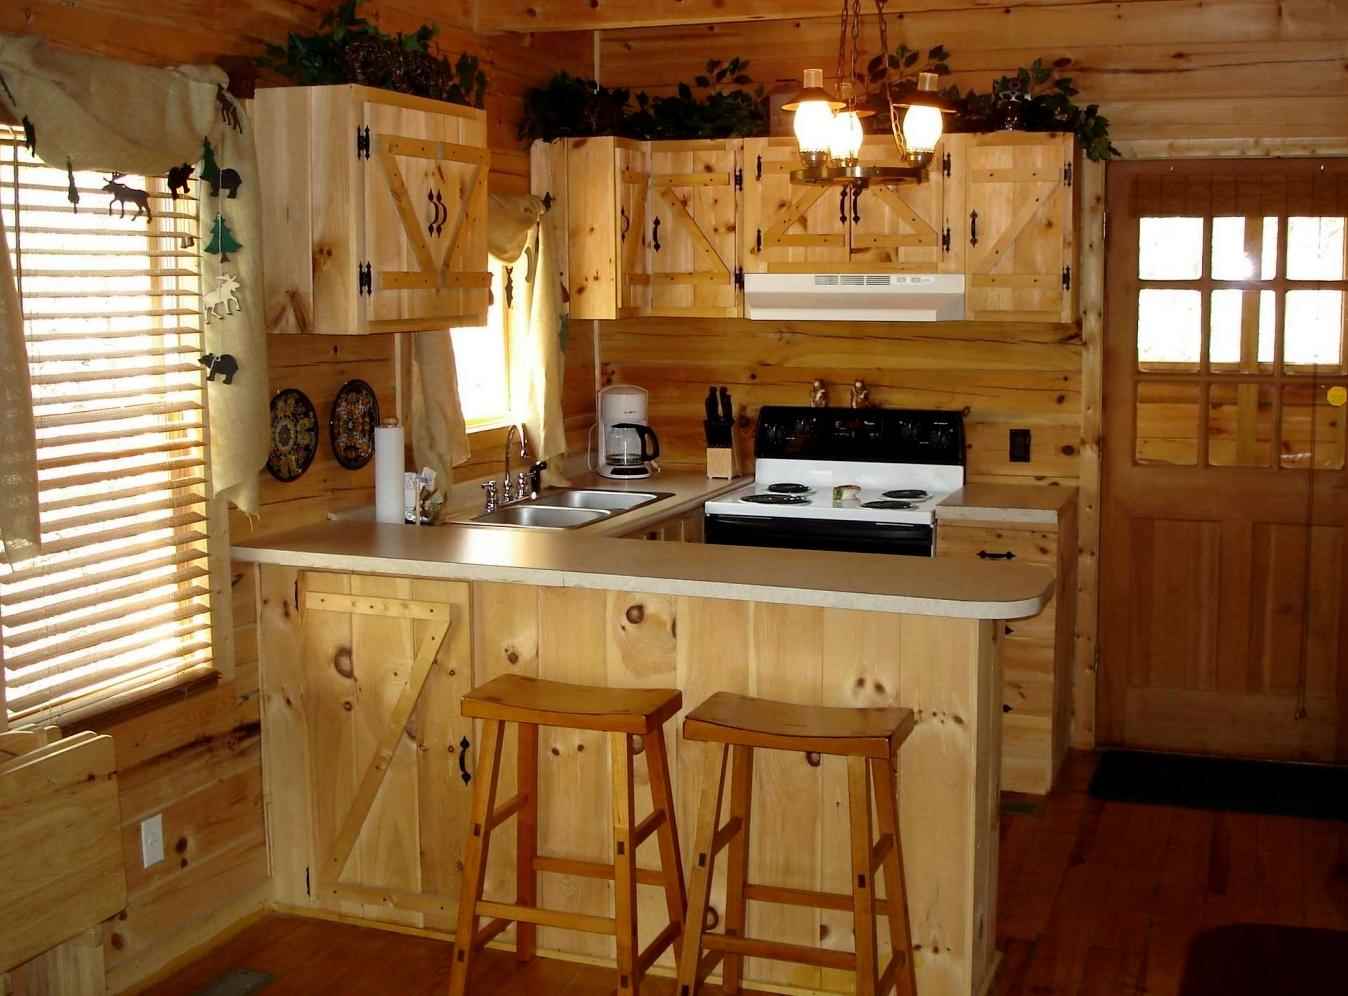 variant of an unusual decor of a rustic kitchen